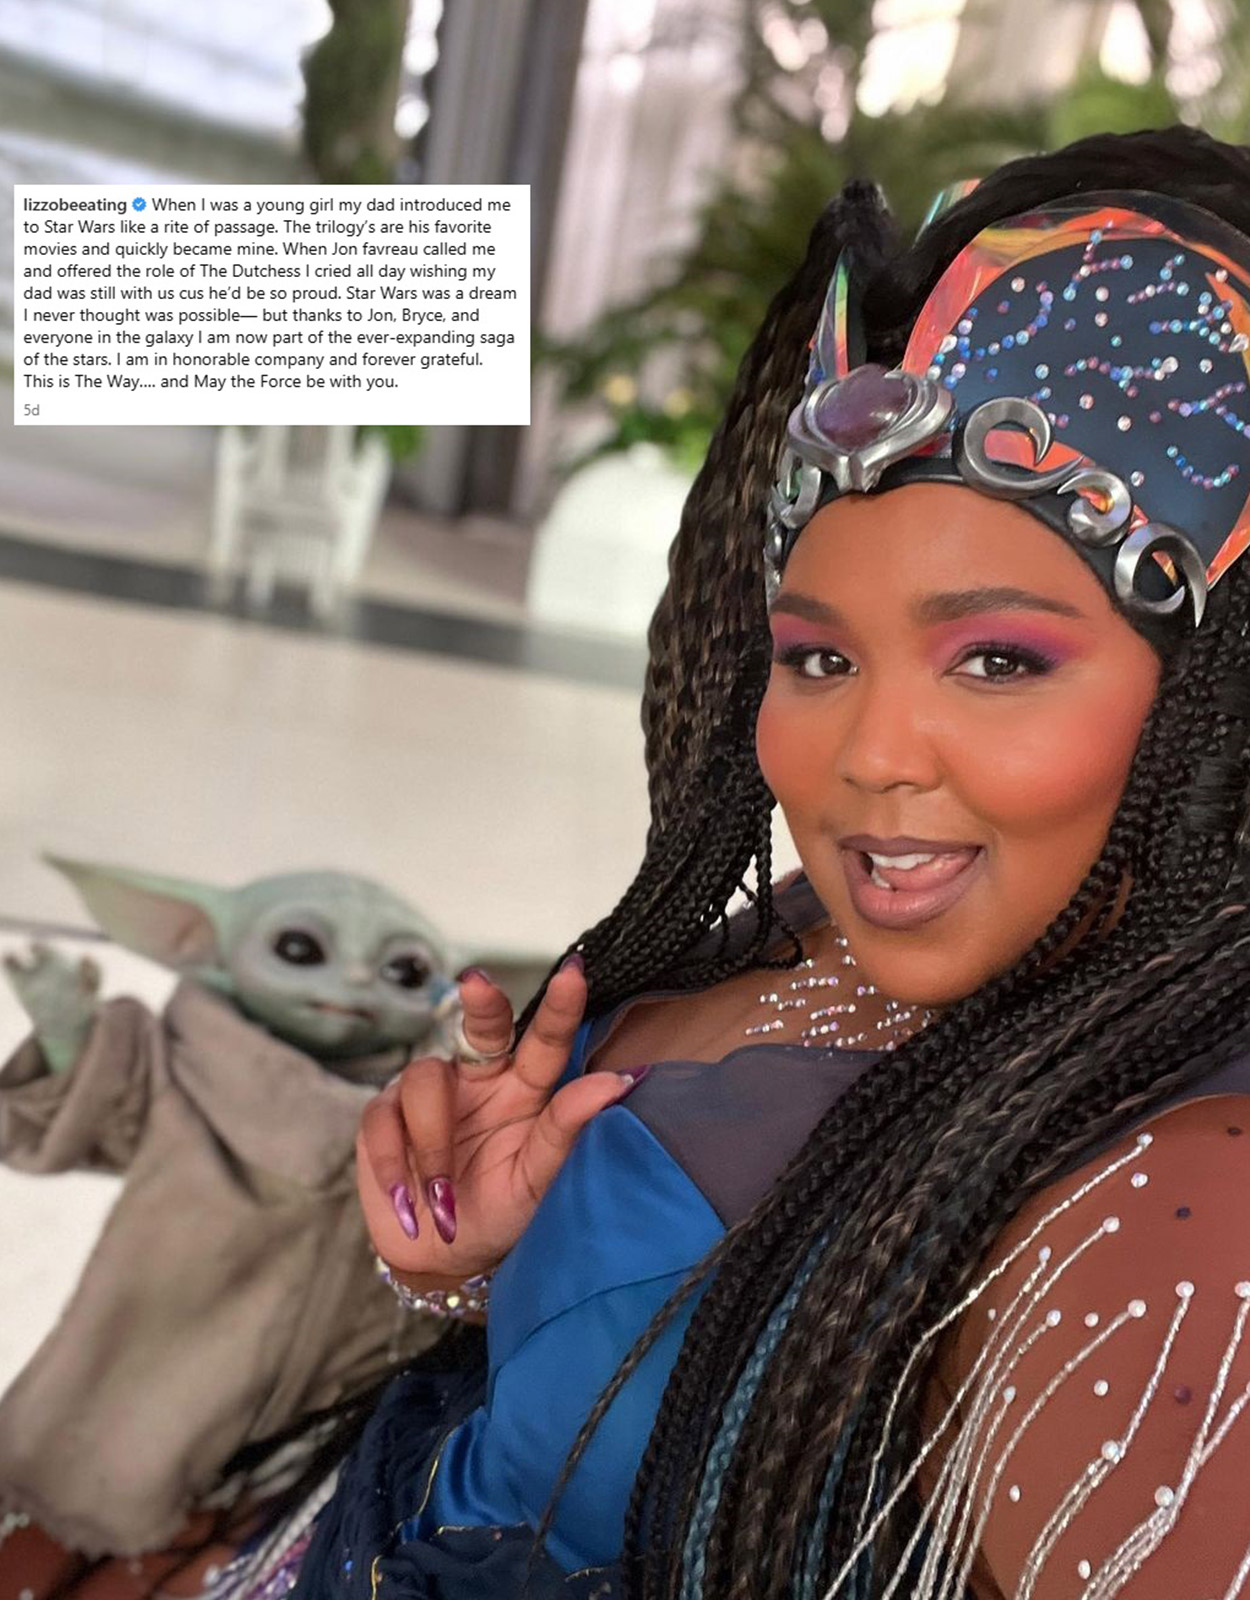 Lizzo in Star Wars